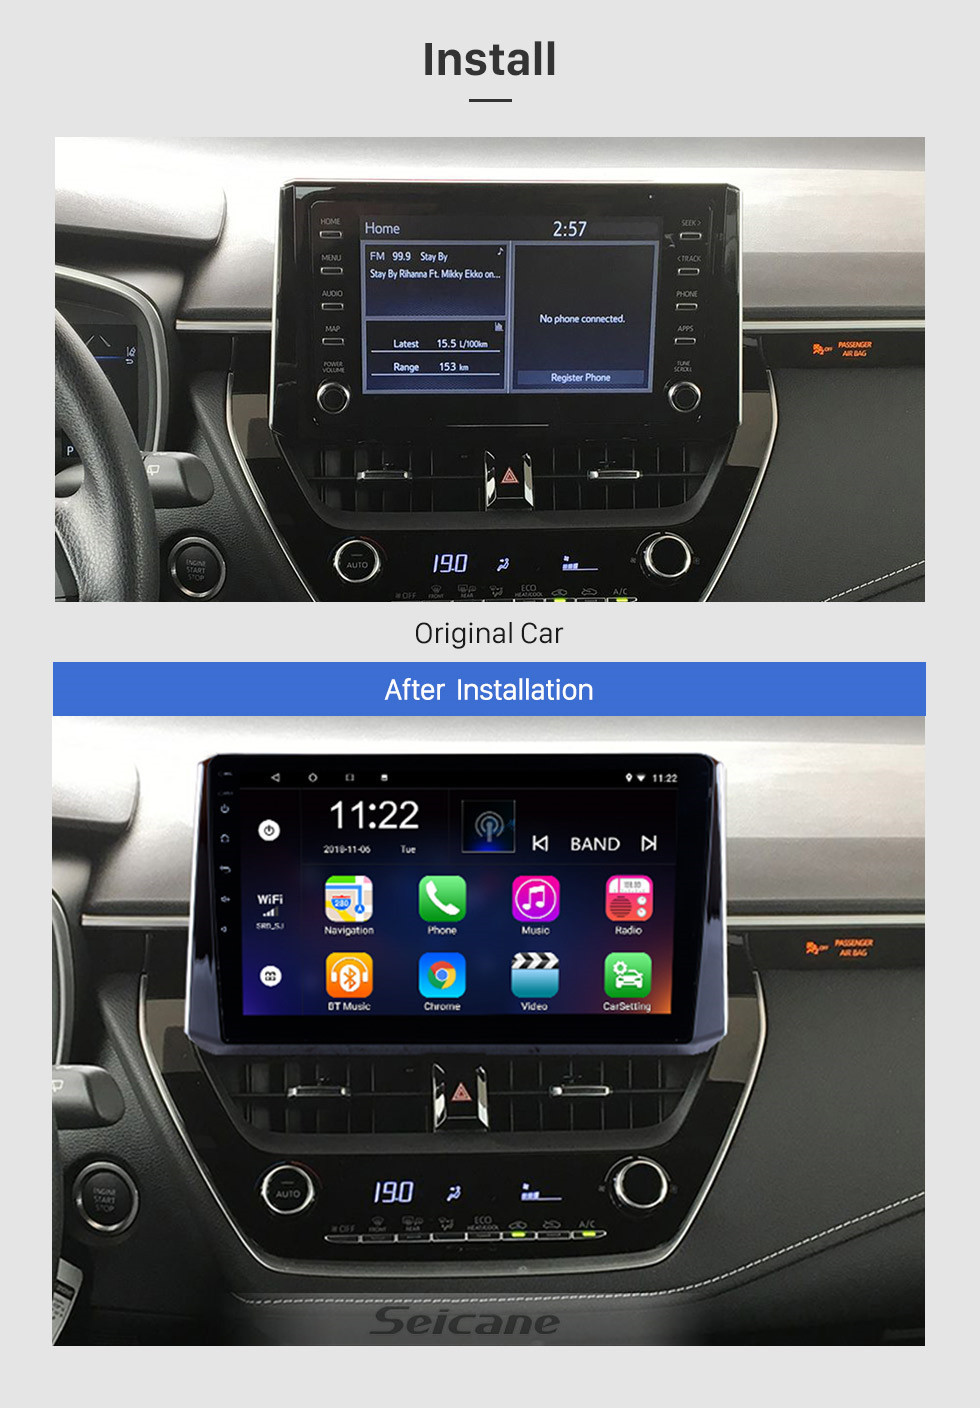 10.1 inch Android 13.0 HD Wifi unit Radio DVR Touchscreen Video Support GPS Bluetooth Carplay Control System 2019 Toyota Navigation Wheel Head Corolla Steering